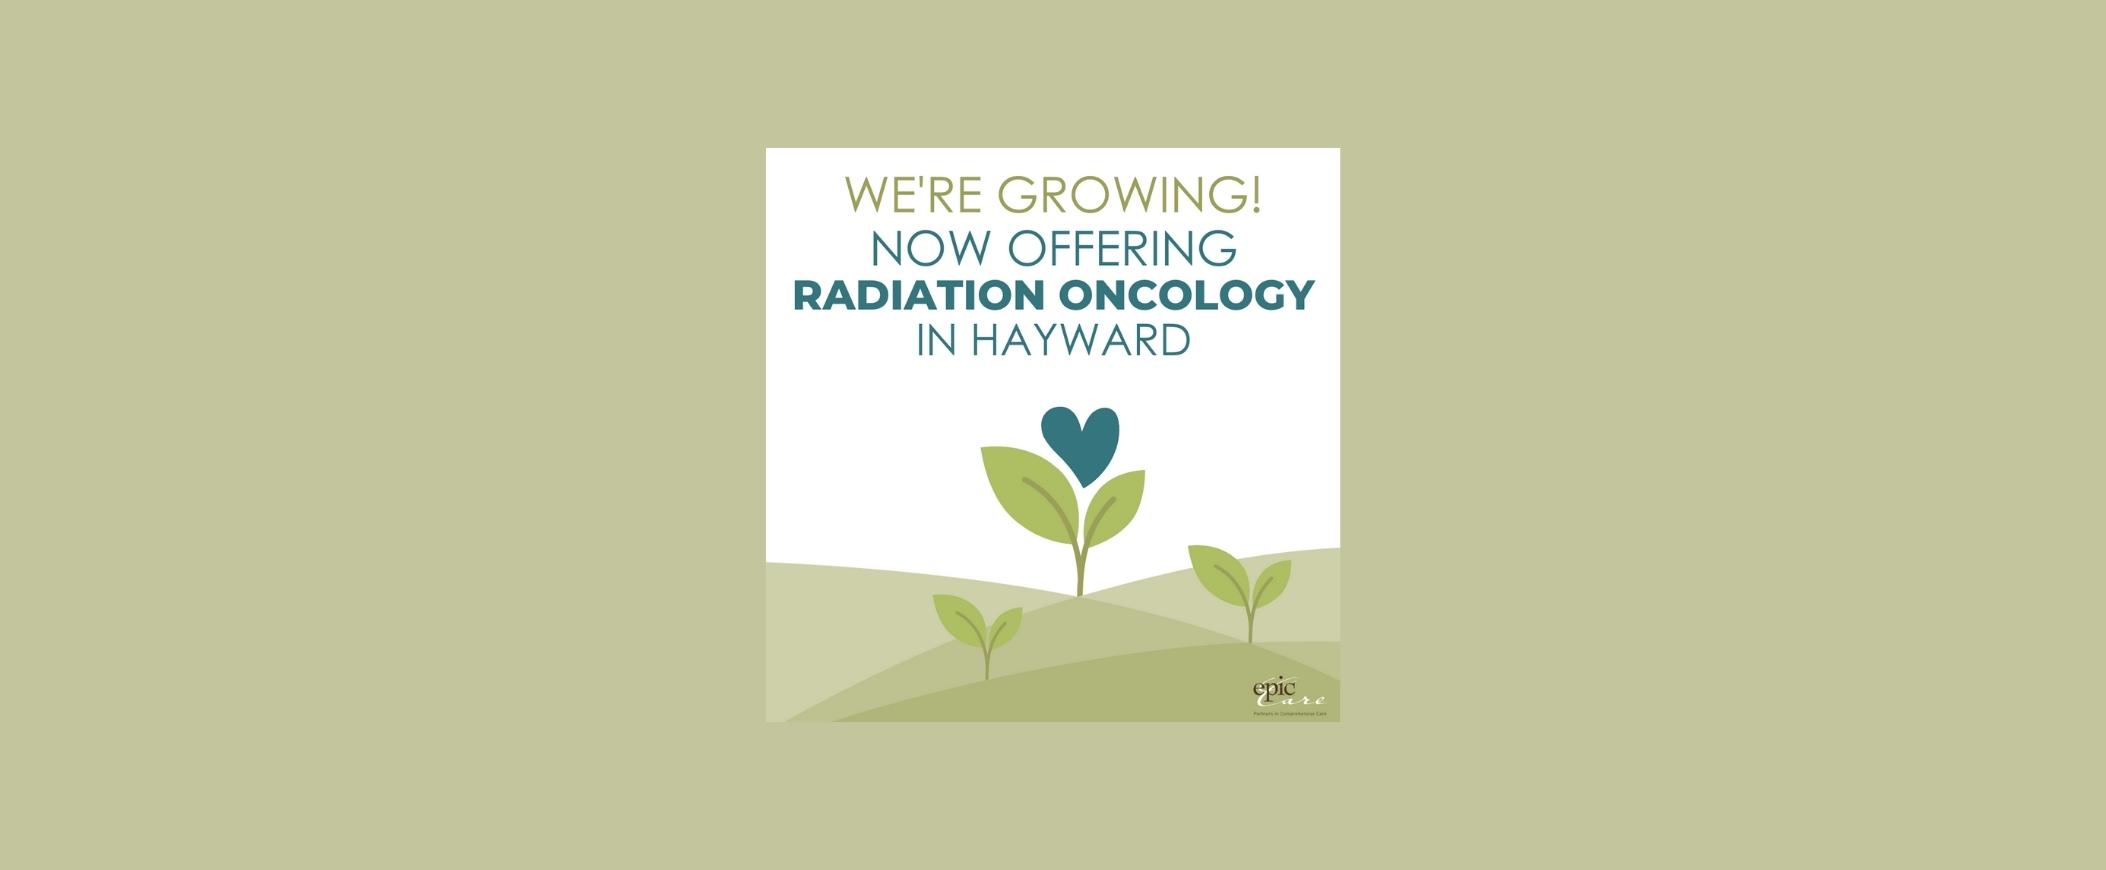 Epic Care Now Offering Radiation Oncology in Hayward!